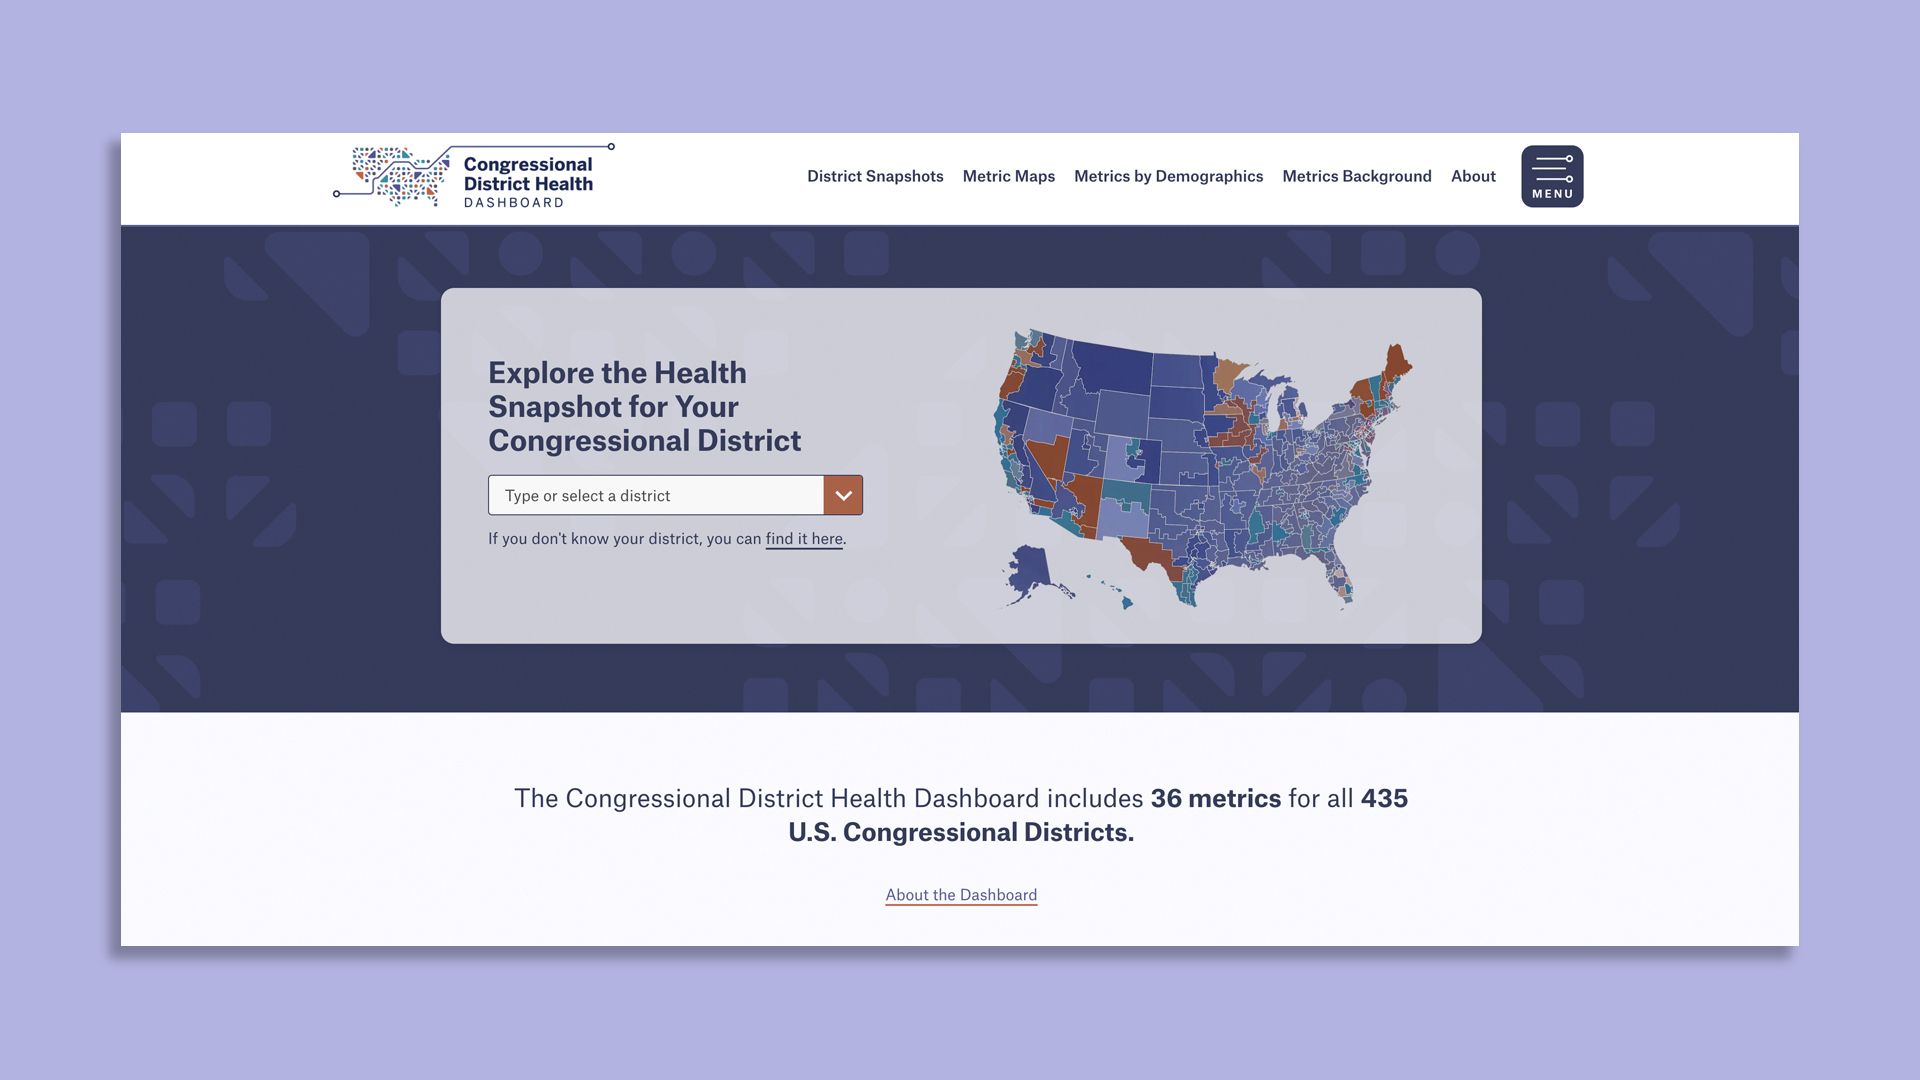 Screenshot of the home page of the Congressional District Health Dashboard's website.